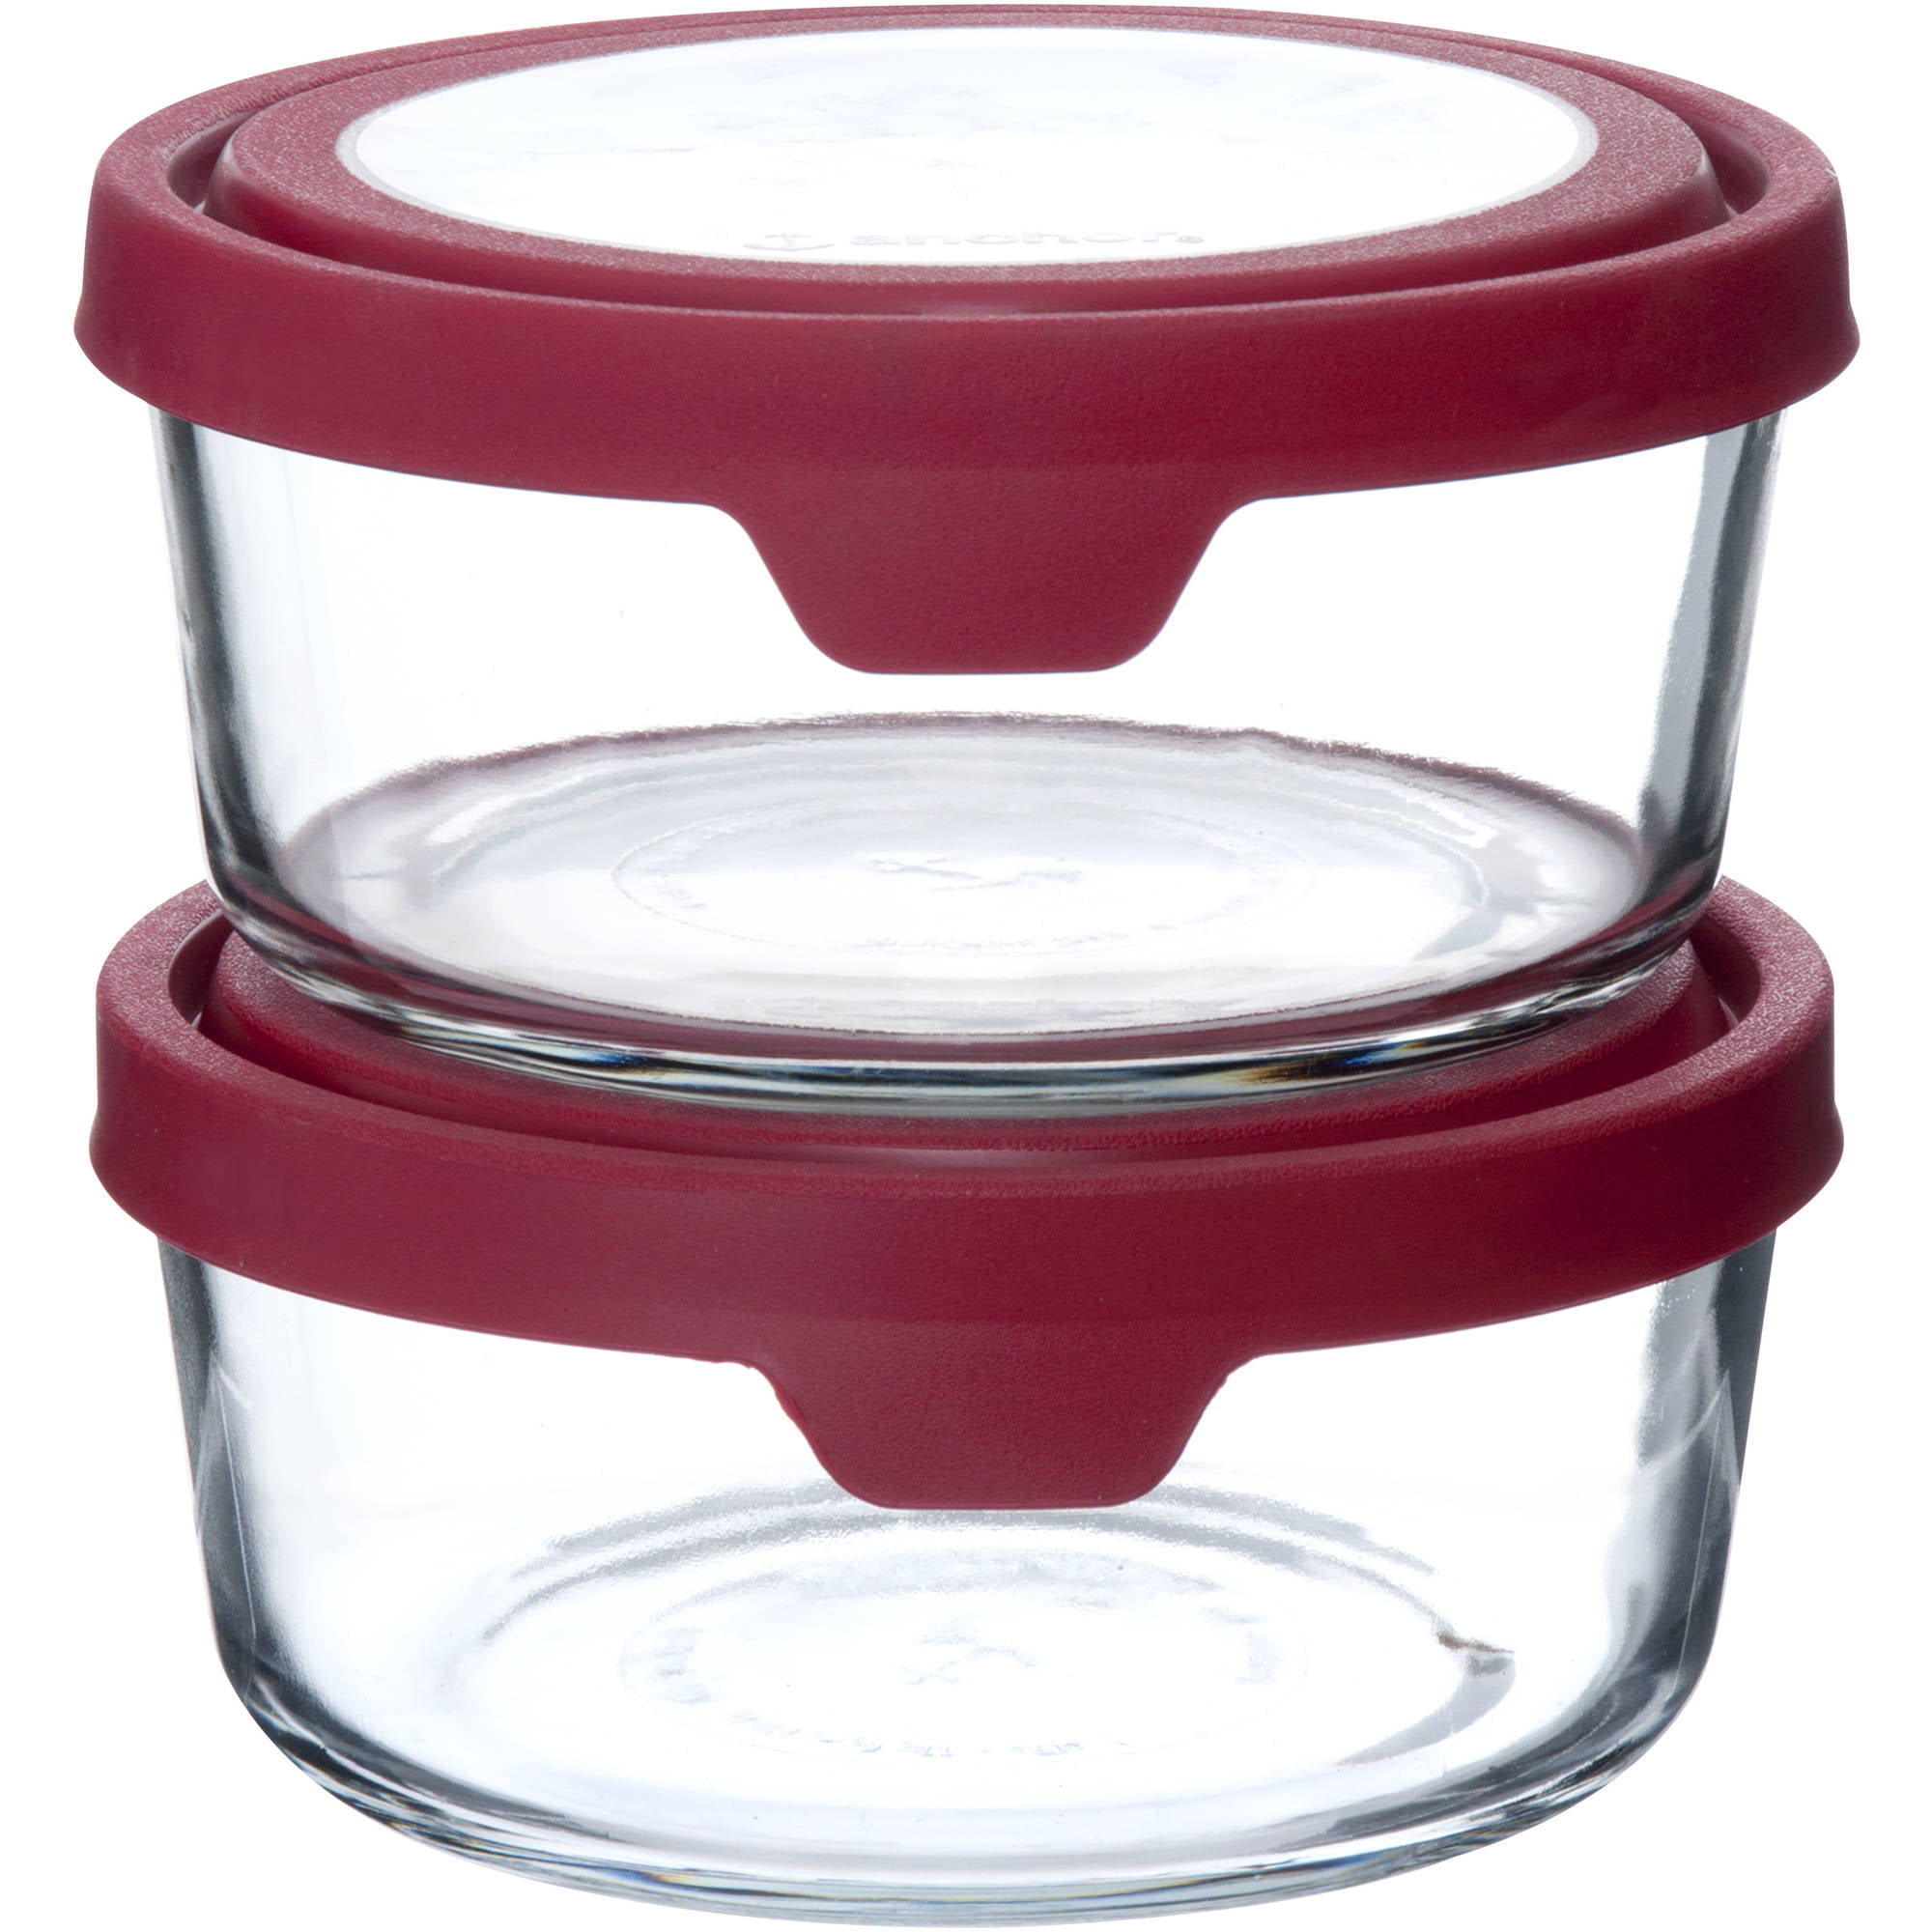 Anchor Hocking TrueSeal Food Storage Containers Review: Nothing Special